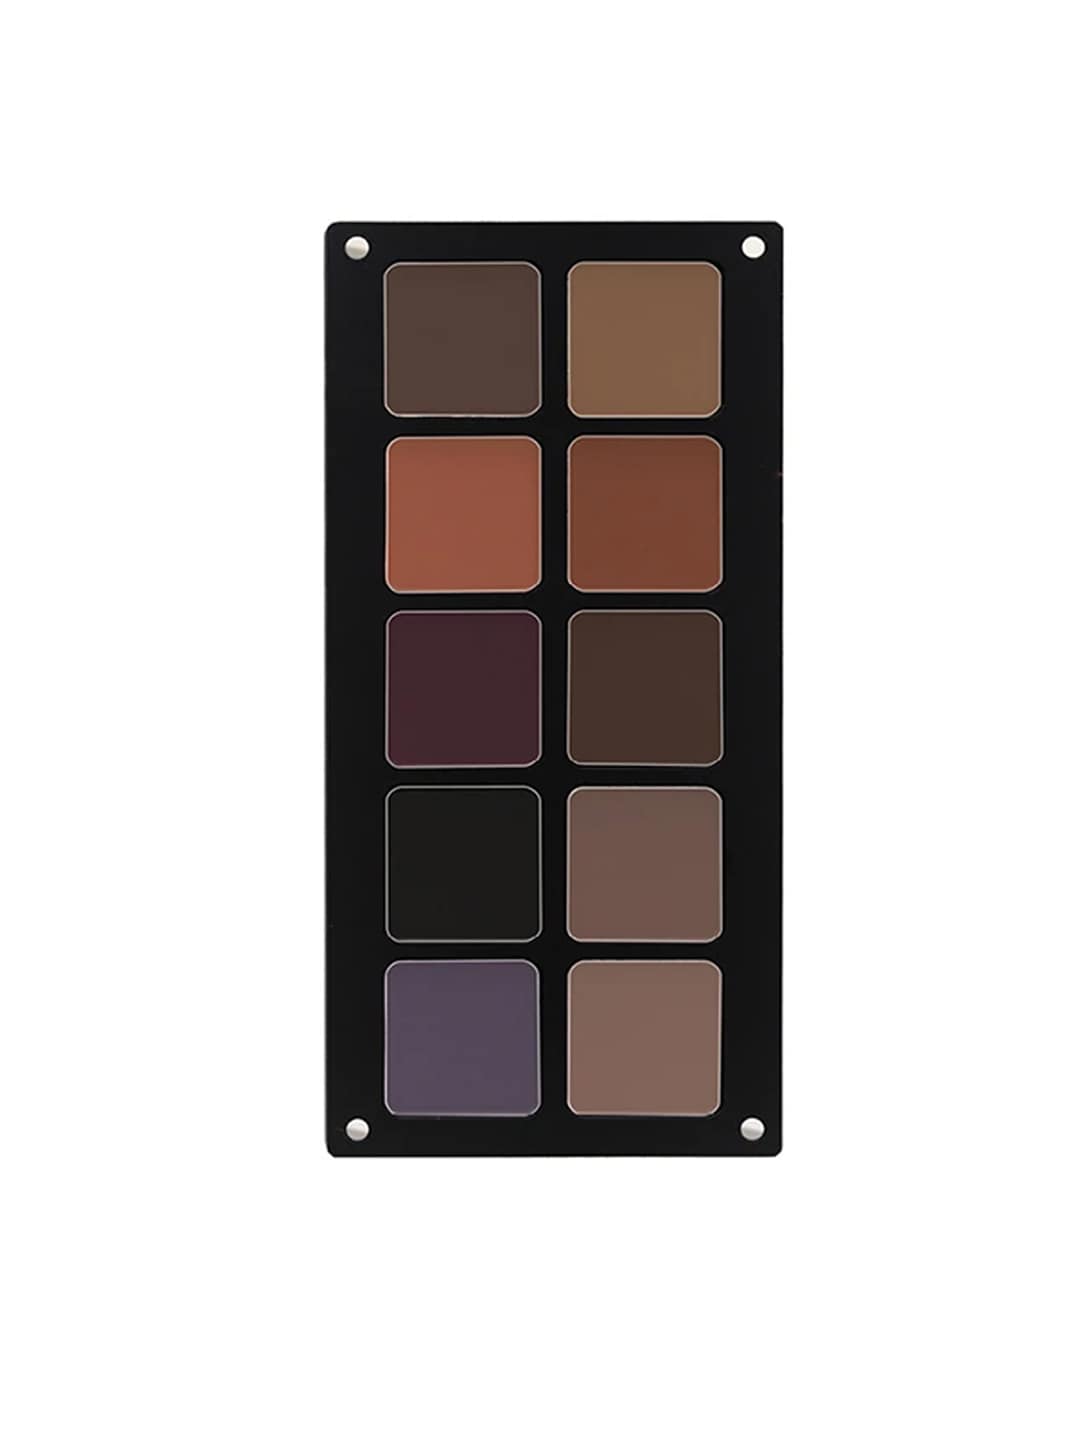 Daily Life Forever52 10 Color Matte Eyeshadow NEP002 Price in India